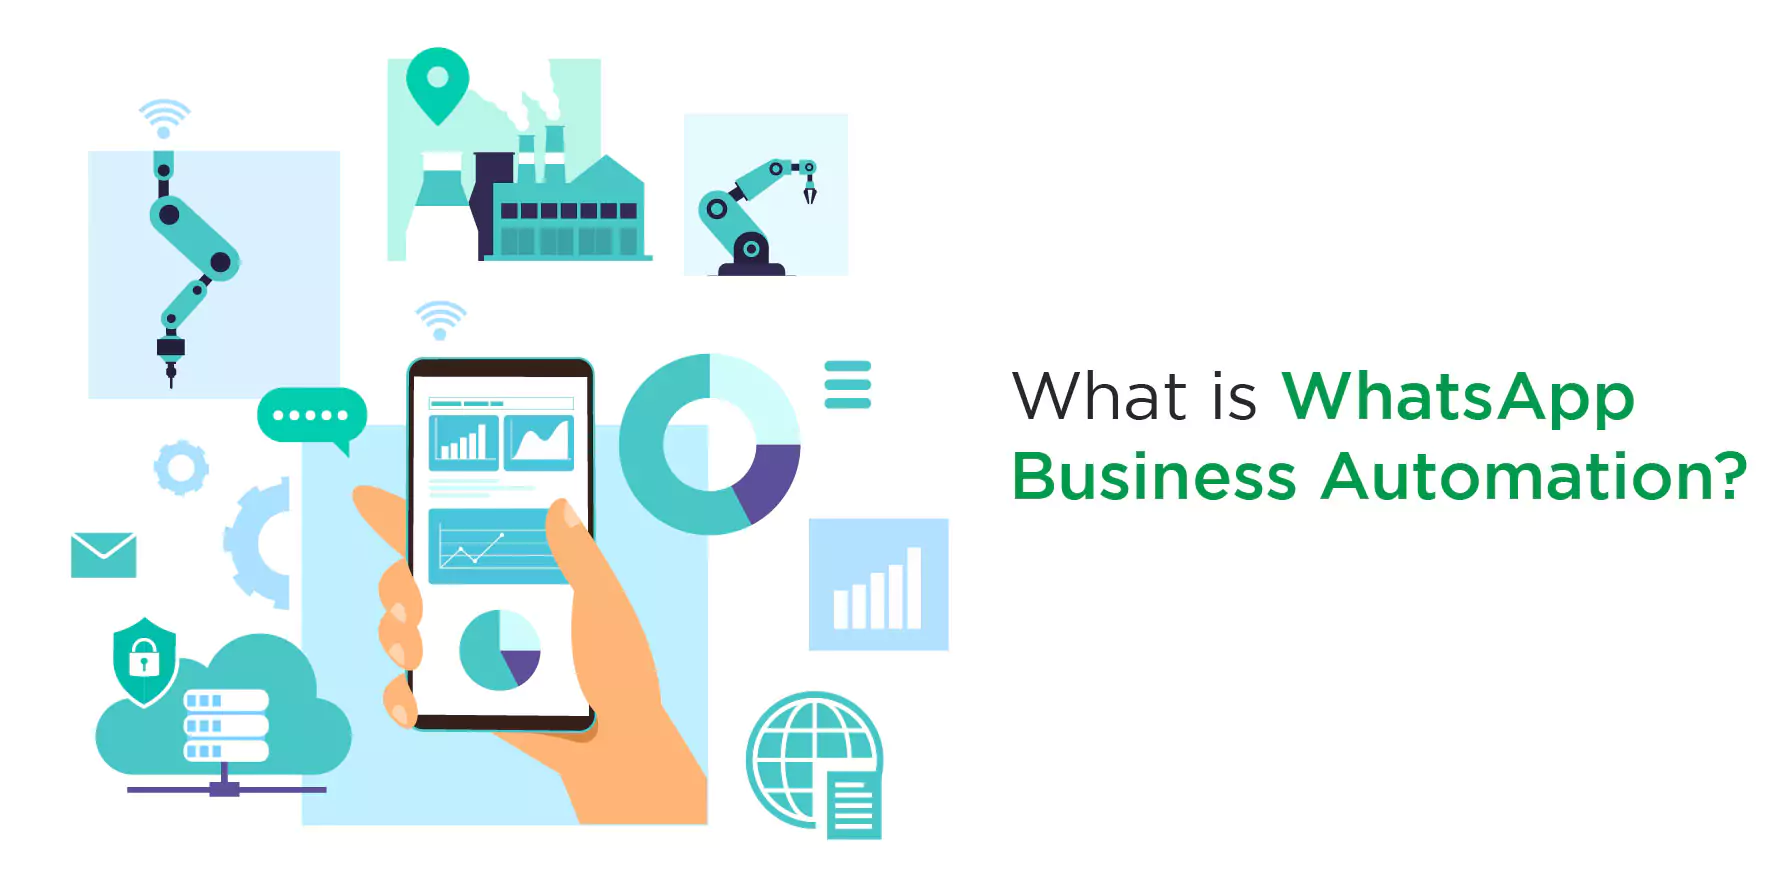 What is WhatsApp Business Automation?